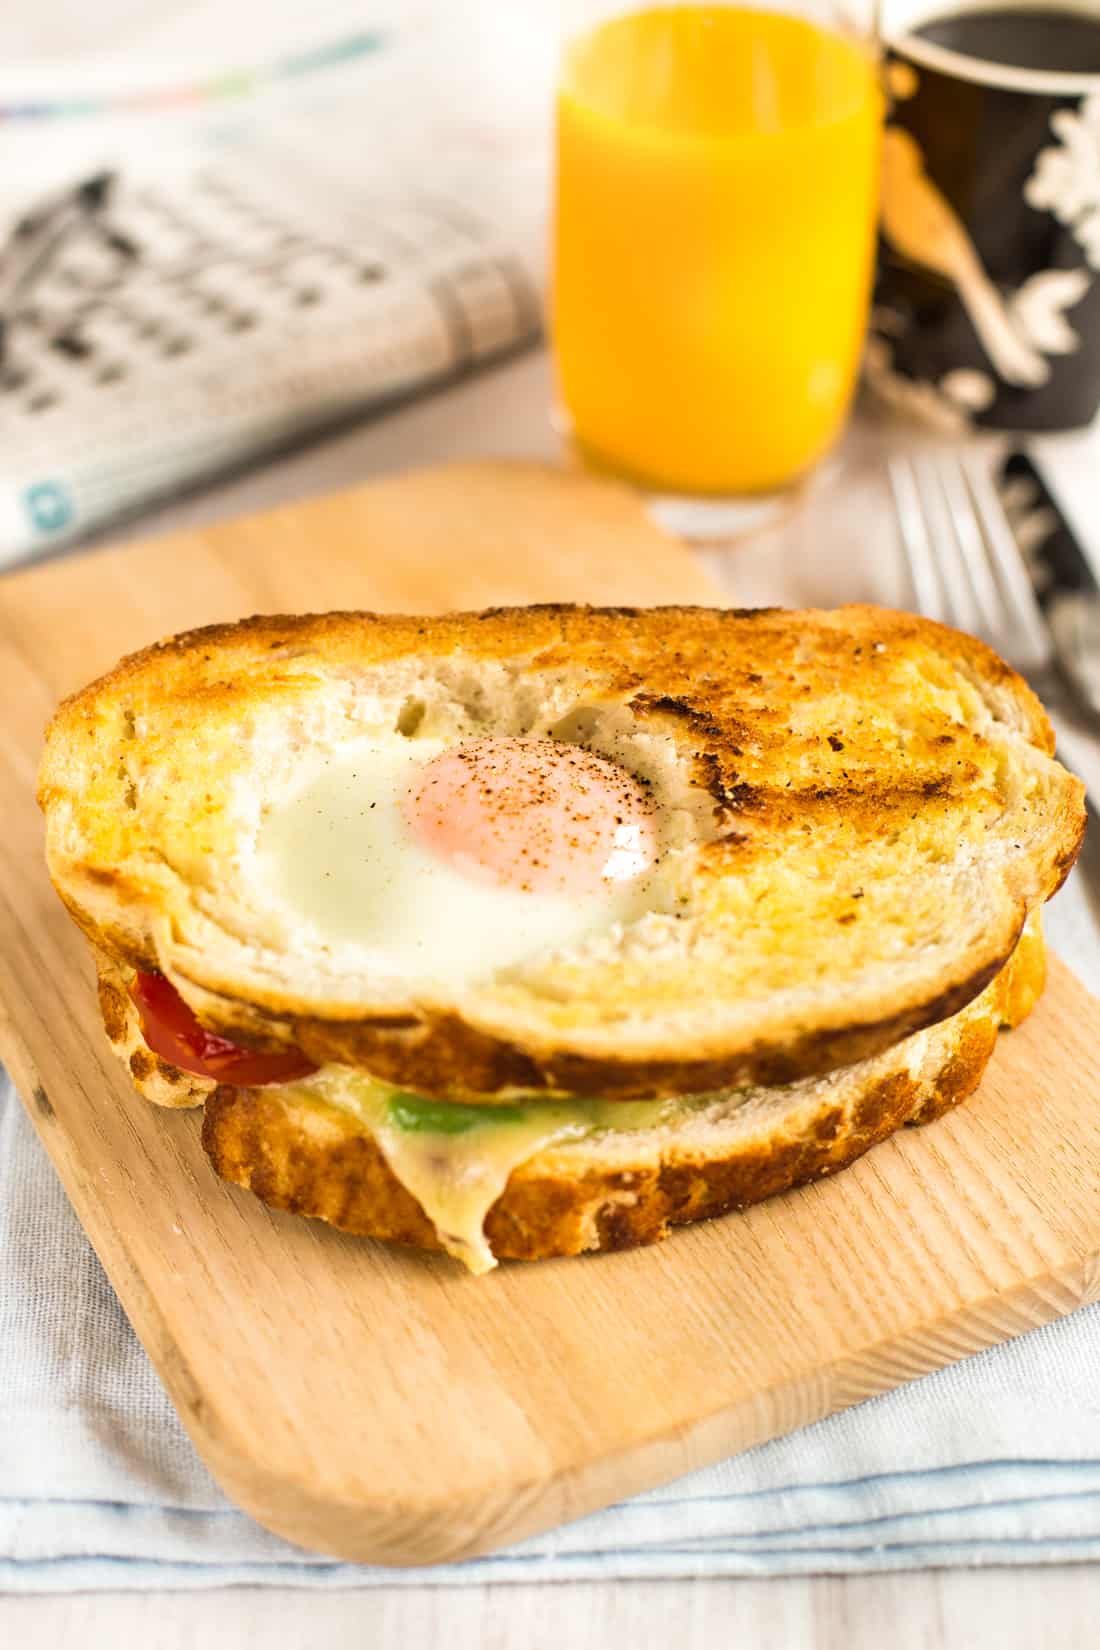 An egg in a hole breakfast sandwich with orange juice and coffee.